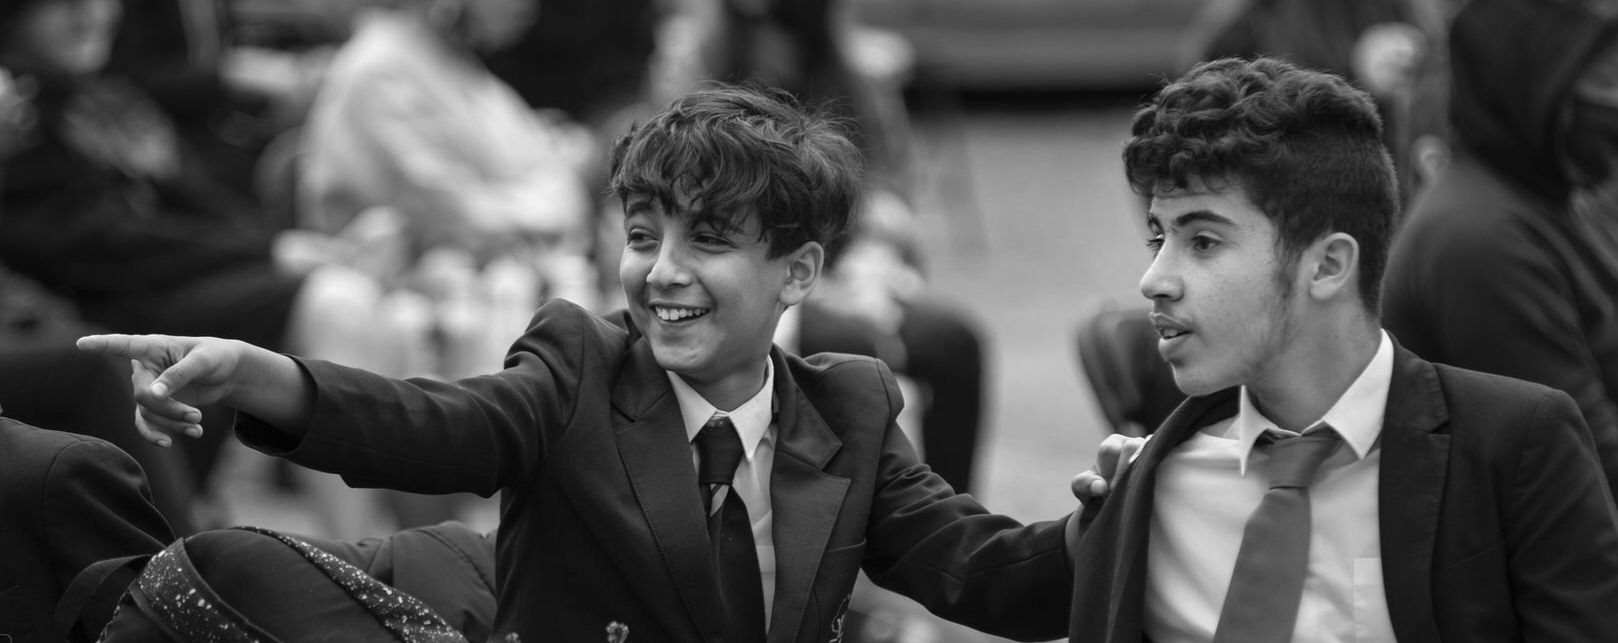 Two teenaged young people are sharing a fun and engaging experience at an cultural venue. One is pointing at something of interest out of shot. The image is in black and white